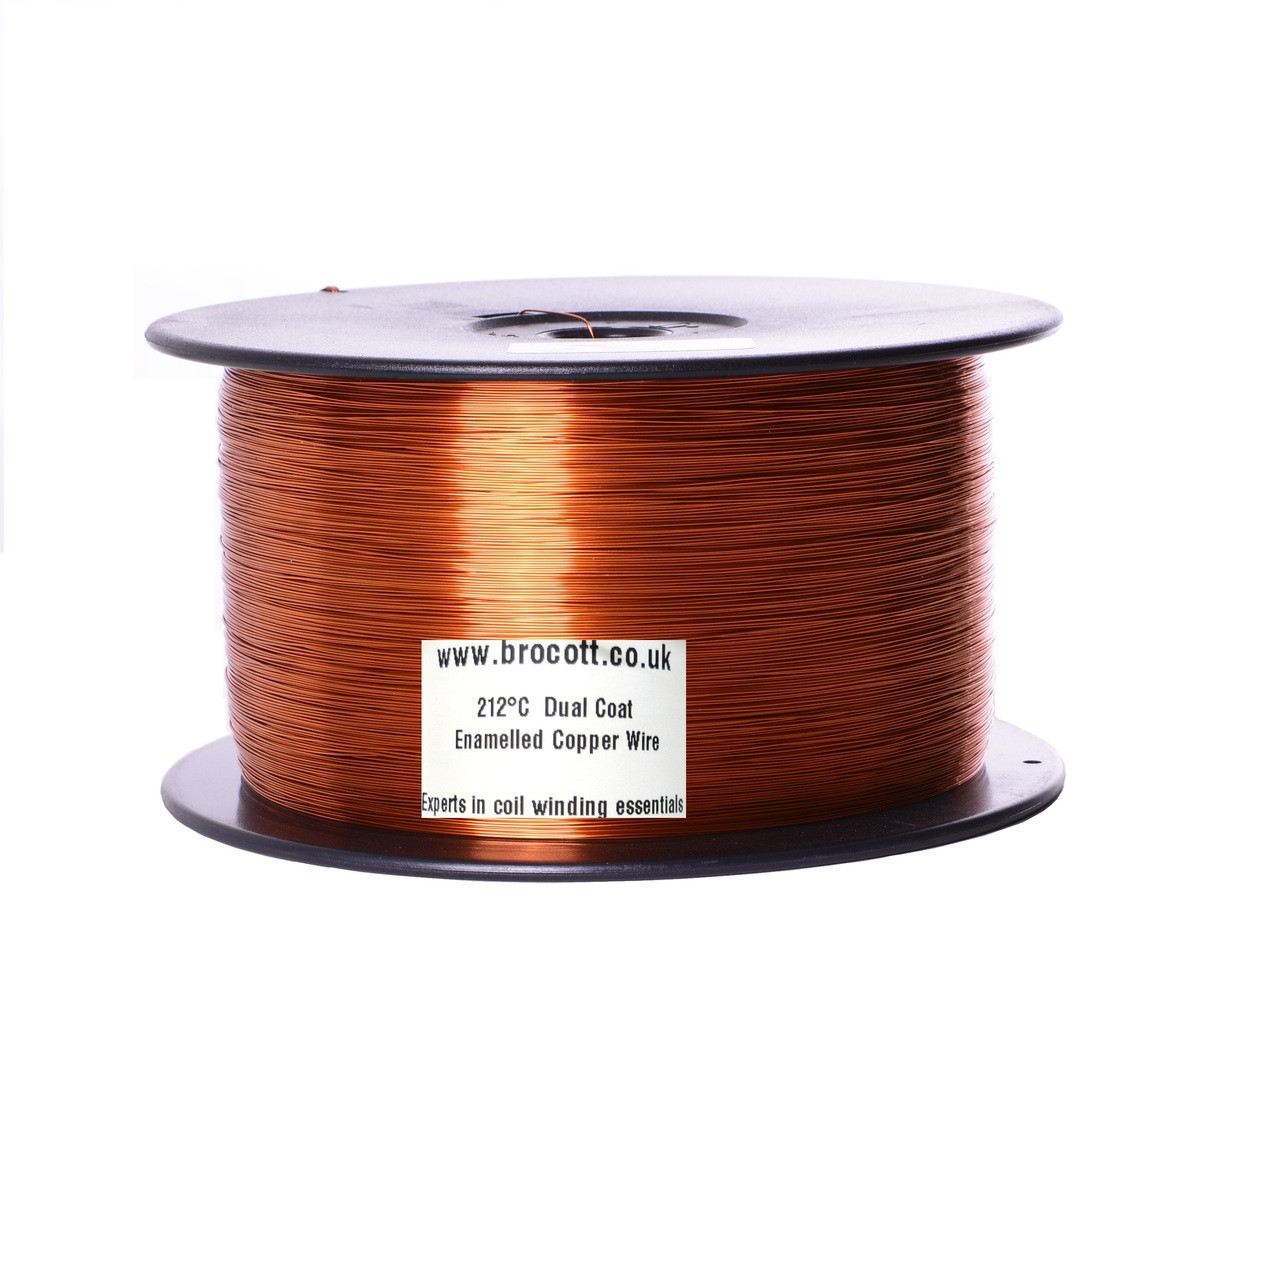 1.25mm ENAMELLED COPPER WIRE 1kg HIGH TEMPERATURE MAGNET WIRE COIL WIRE 